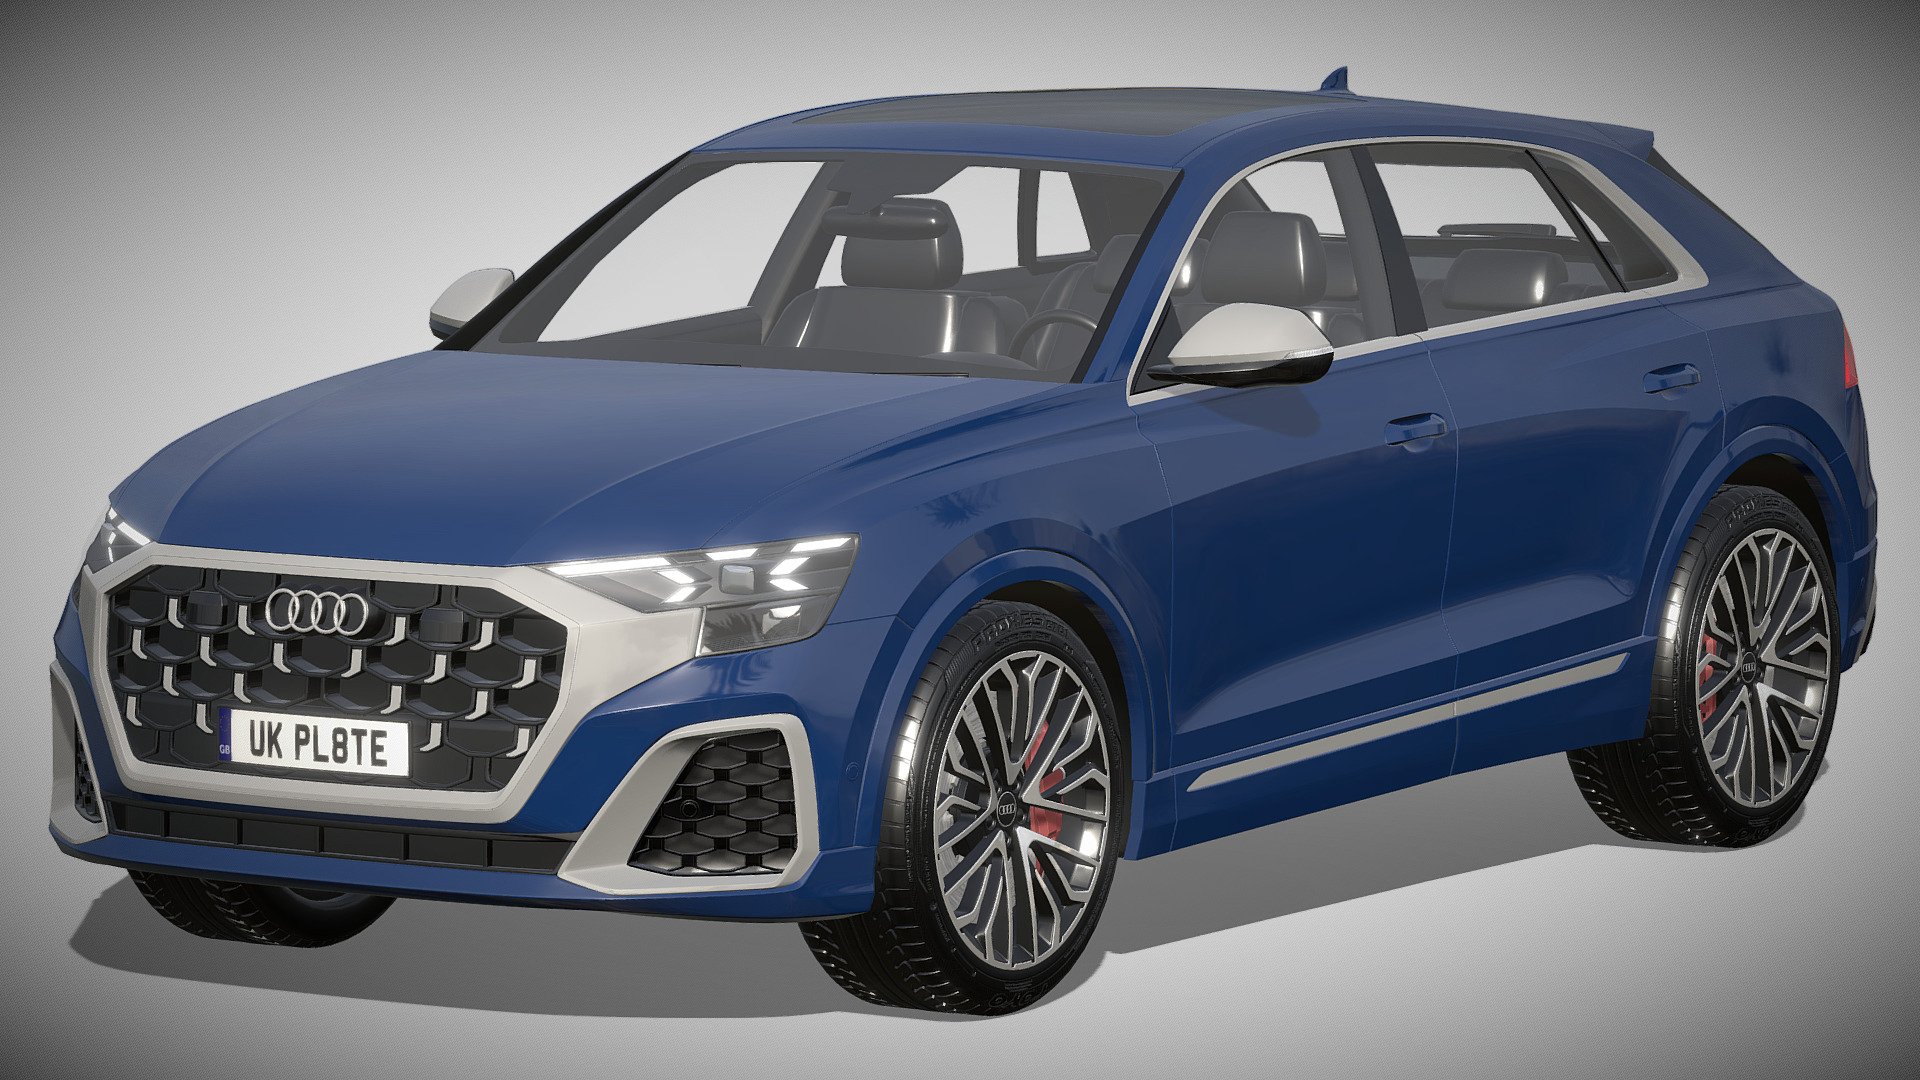 Audi SQ8 2024

https://www.audi.de/de/brand/de/neuwagen/q8/sq8-suv.html

Clean geometry Light weight model, yet completely detailed for HI-Res renders. Use for movies, Advertisements or games

Corona render and materials

All textures include in *.rar files

Lighting setup is not included in the file! - Audi SQ8 2024 - Buy Royalty Free 3D model by zifir3d 3d model